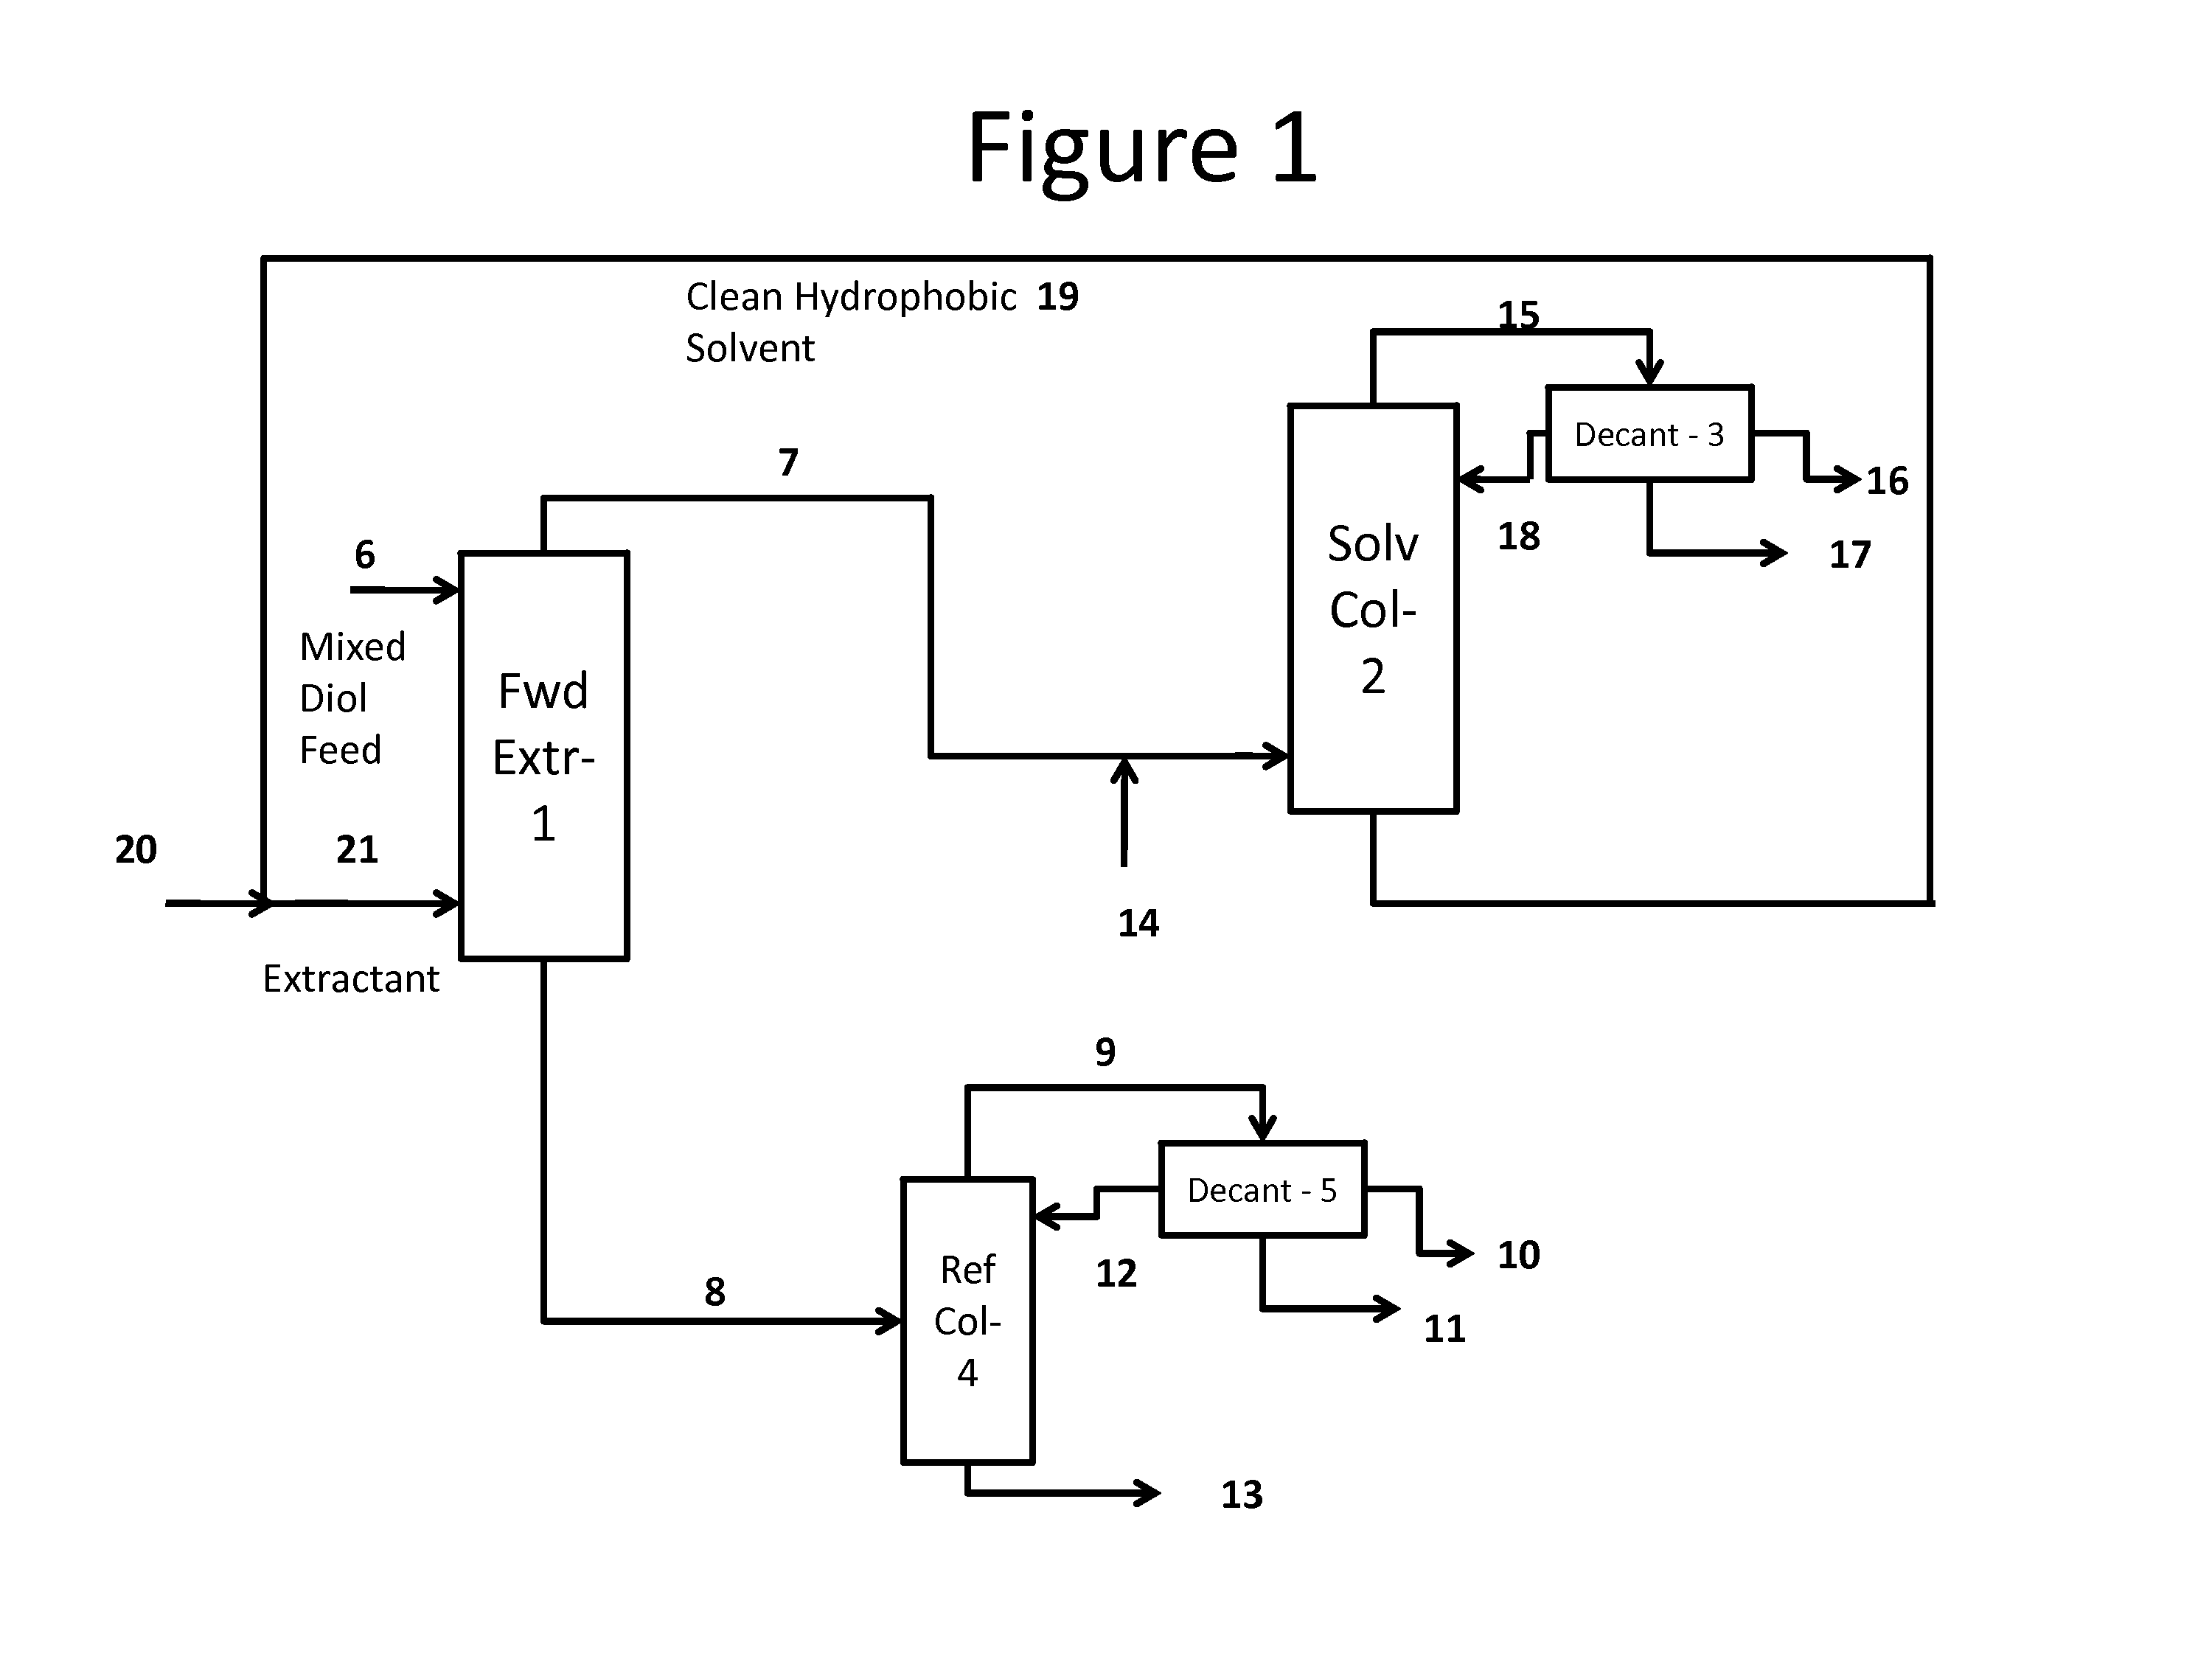 Process for the separation and purification of a mixed diol stream